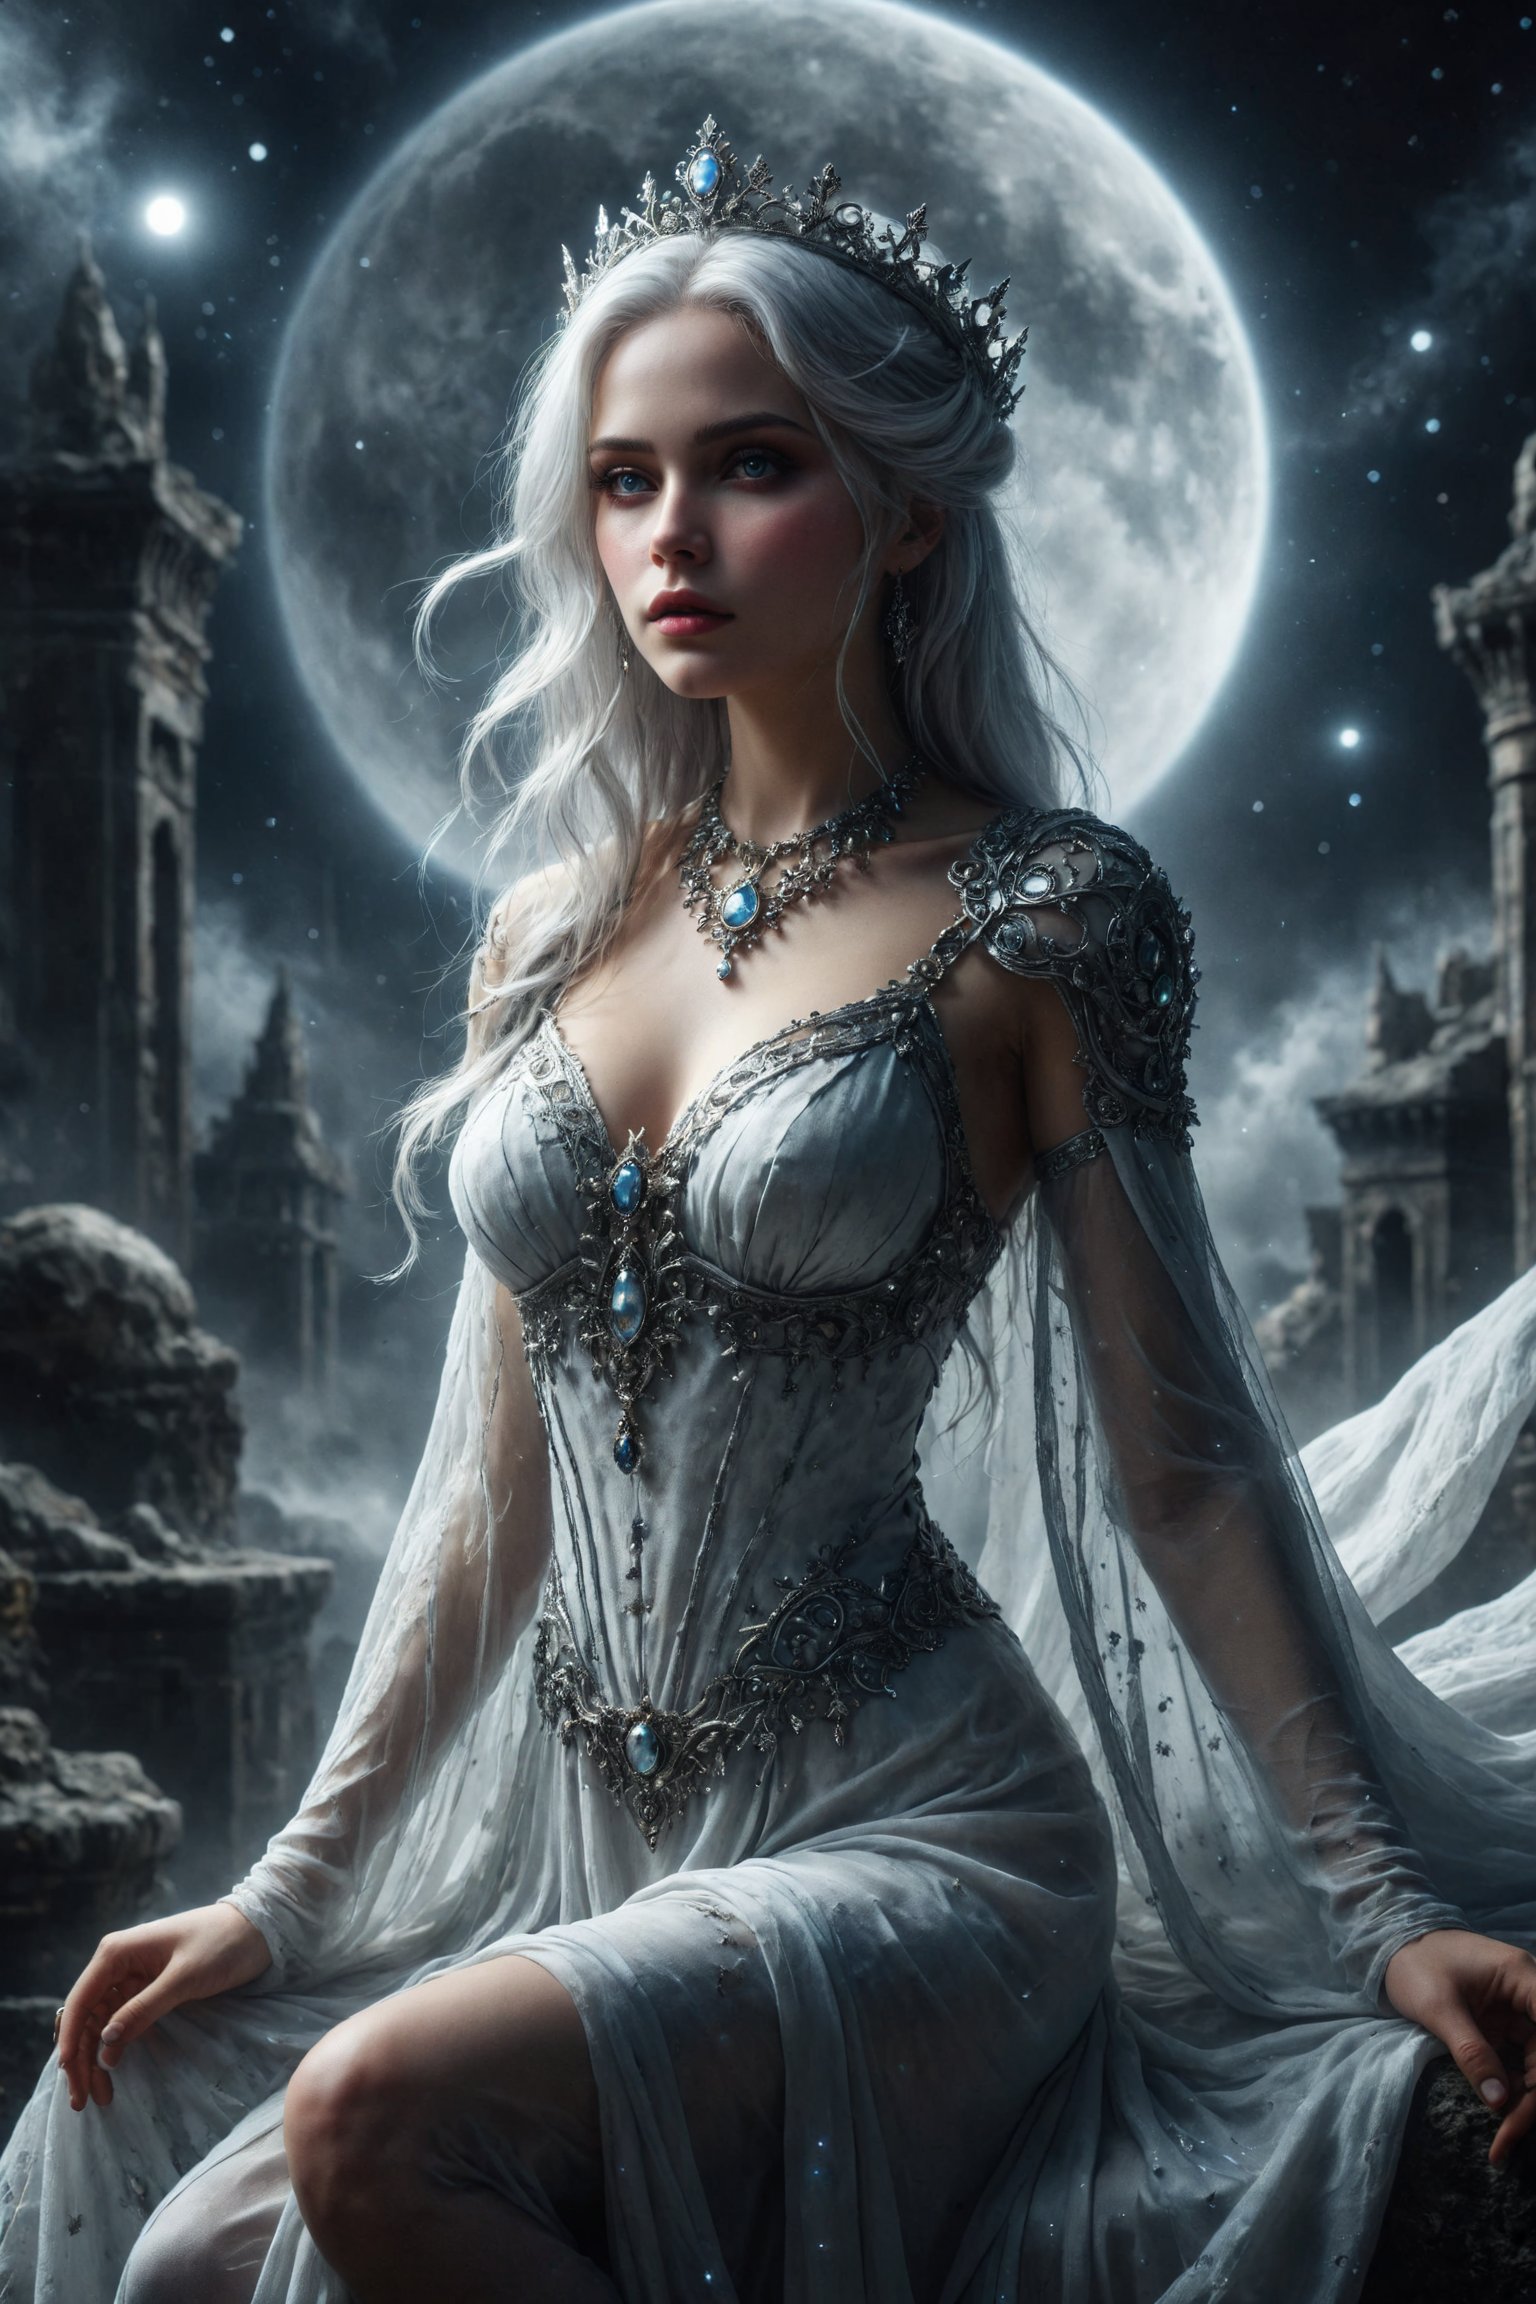 Queen King of moom selene full body,silver hair, tunic with, Beautiful and serene magnificient escene. 